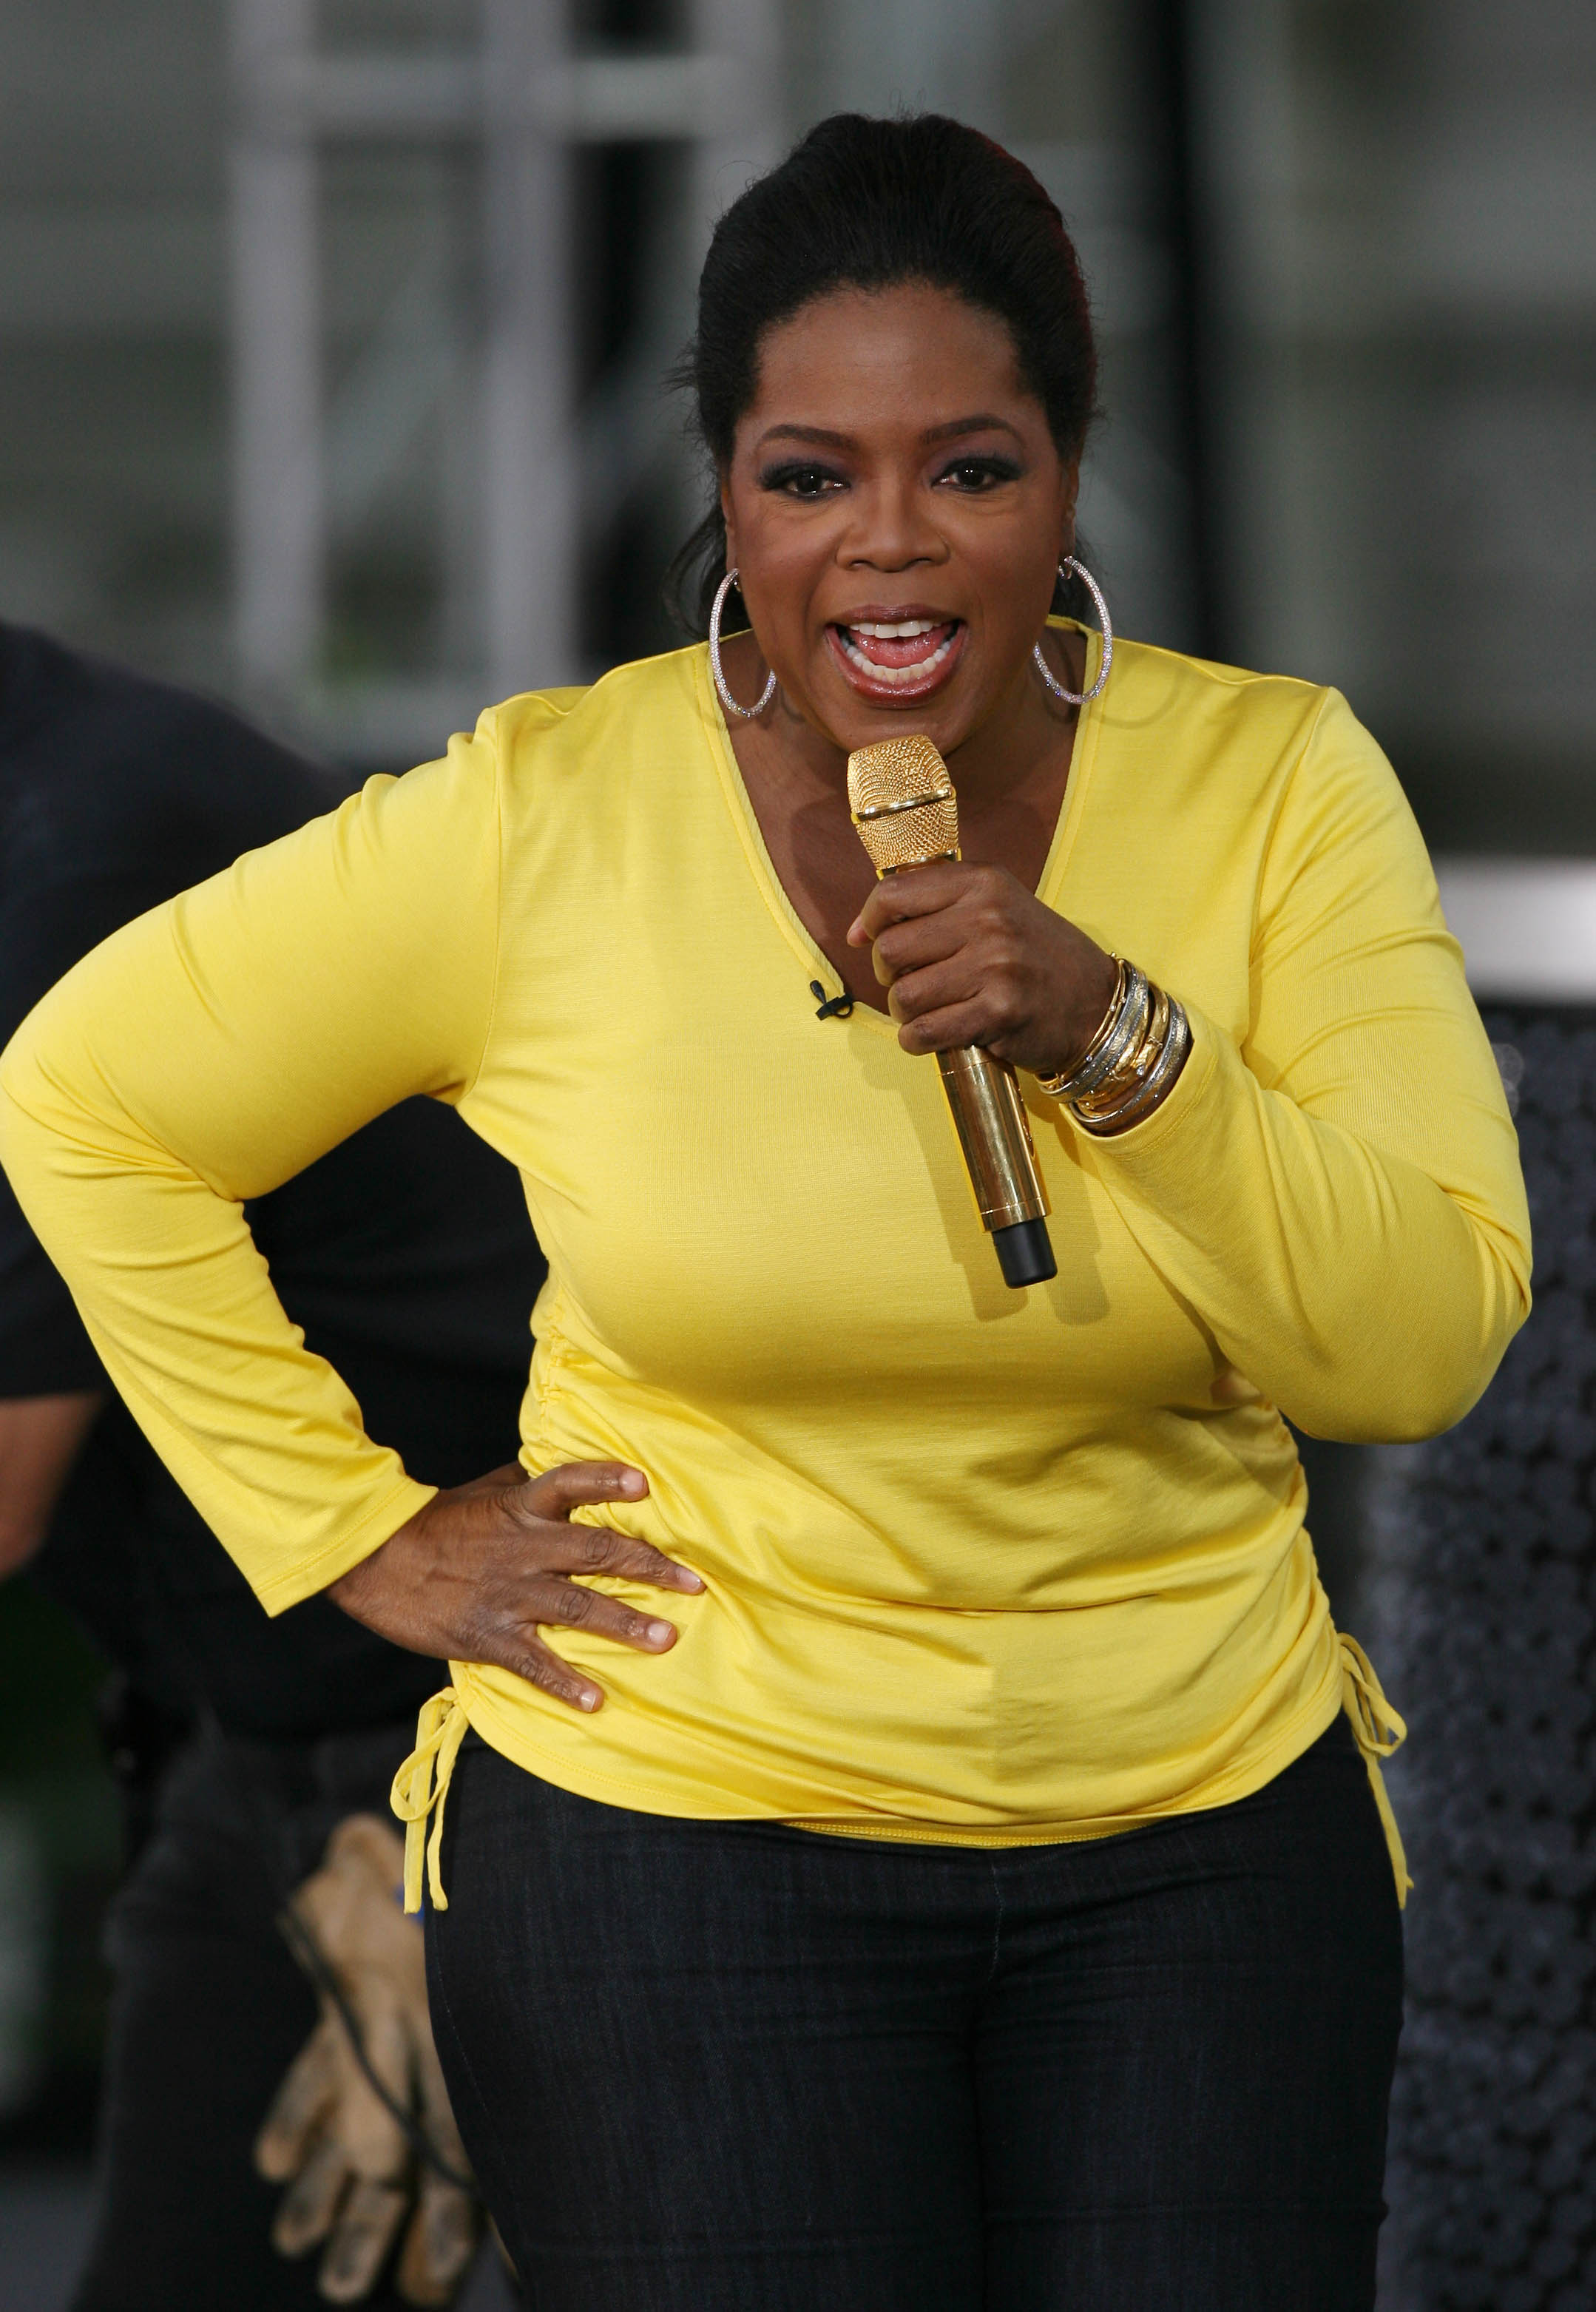 Oprah Winfrey during the kickoff party for season 24 of "The Oprah Winfrey Show" in Chicago, 2009 | Source: Getty Images